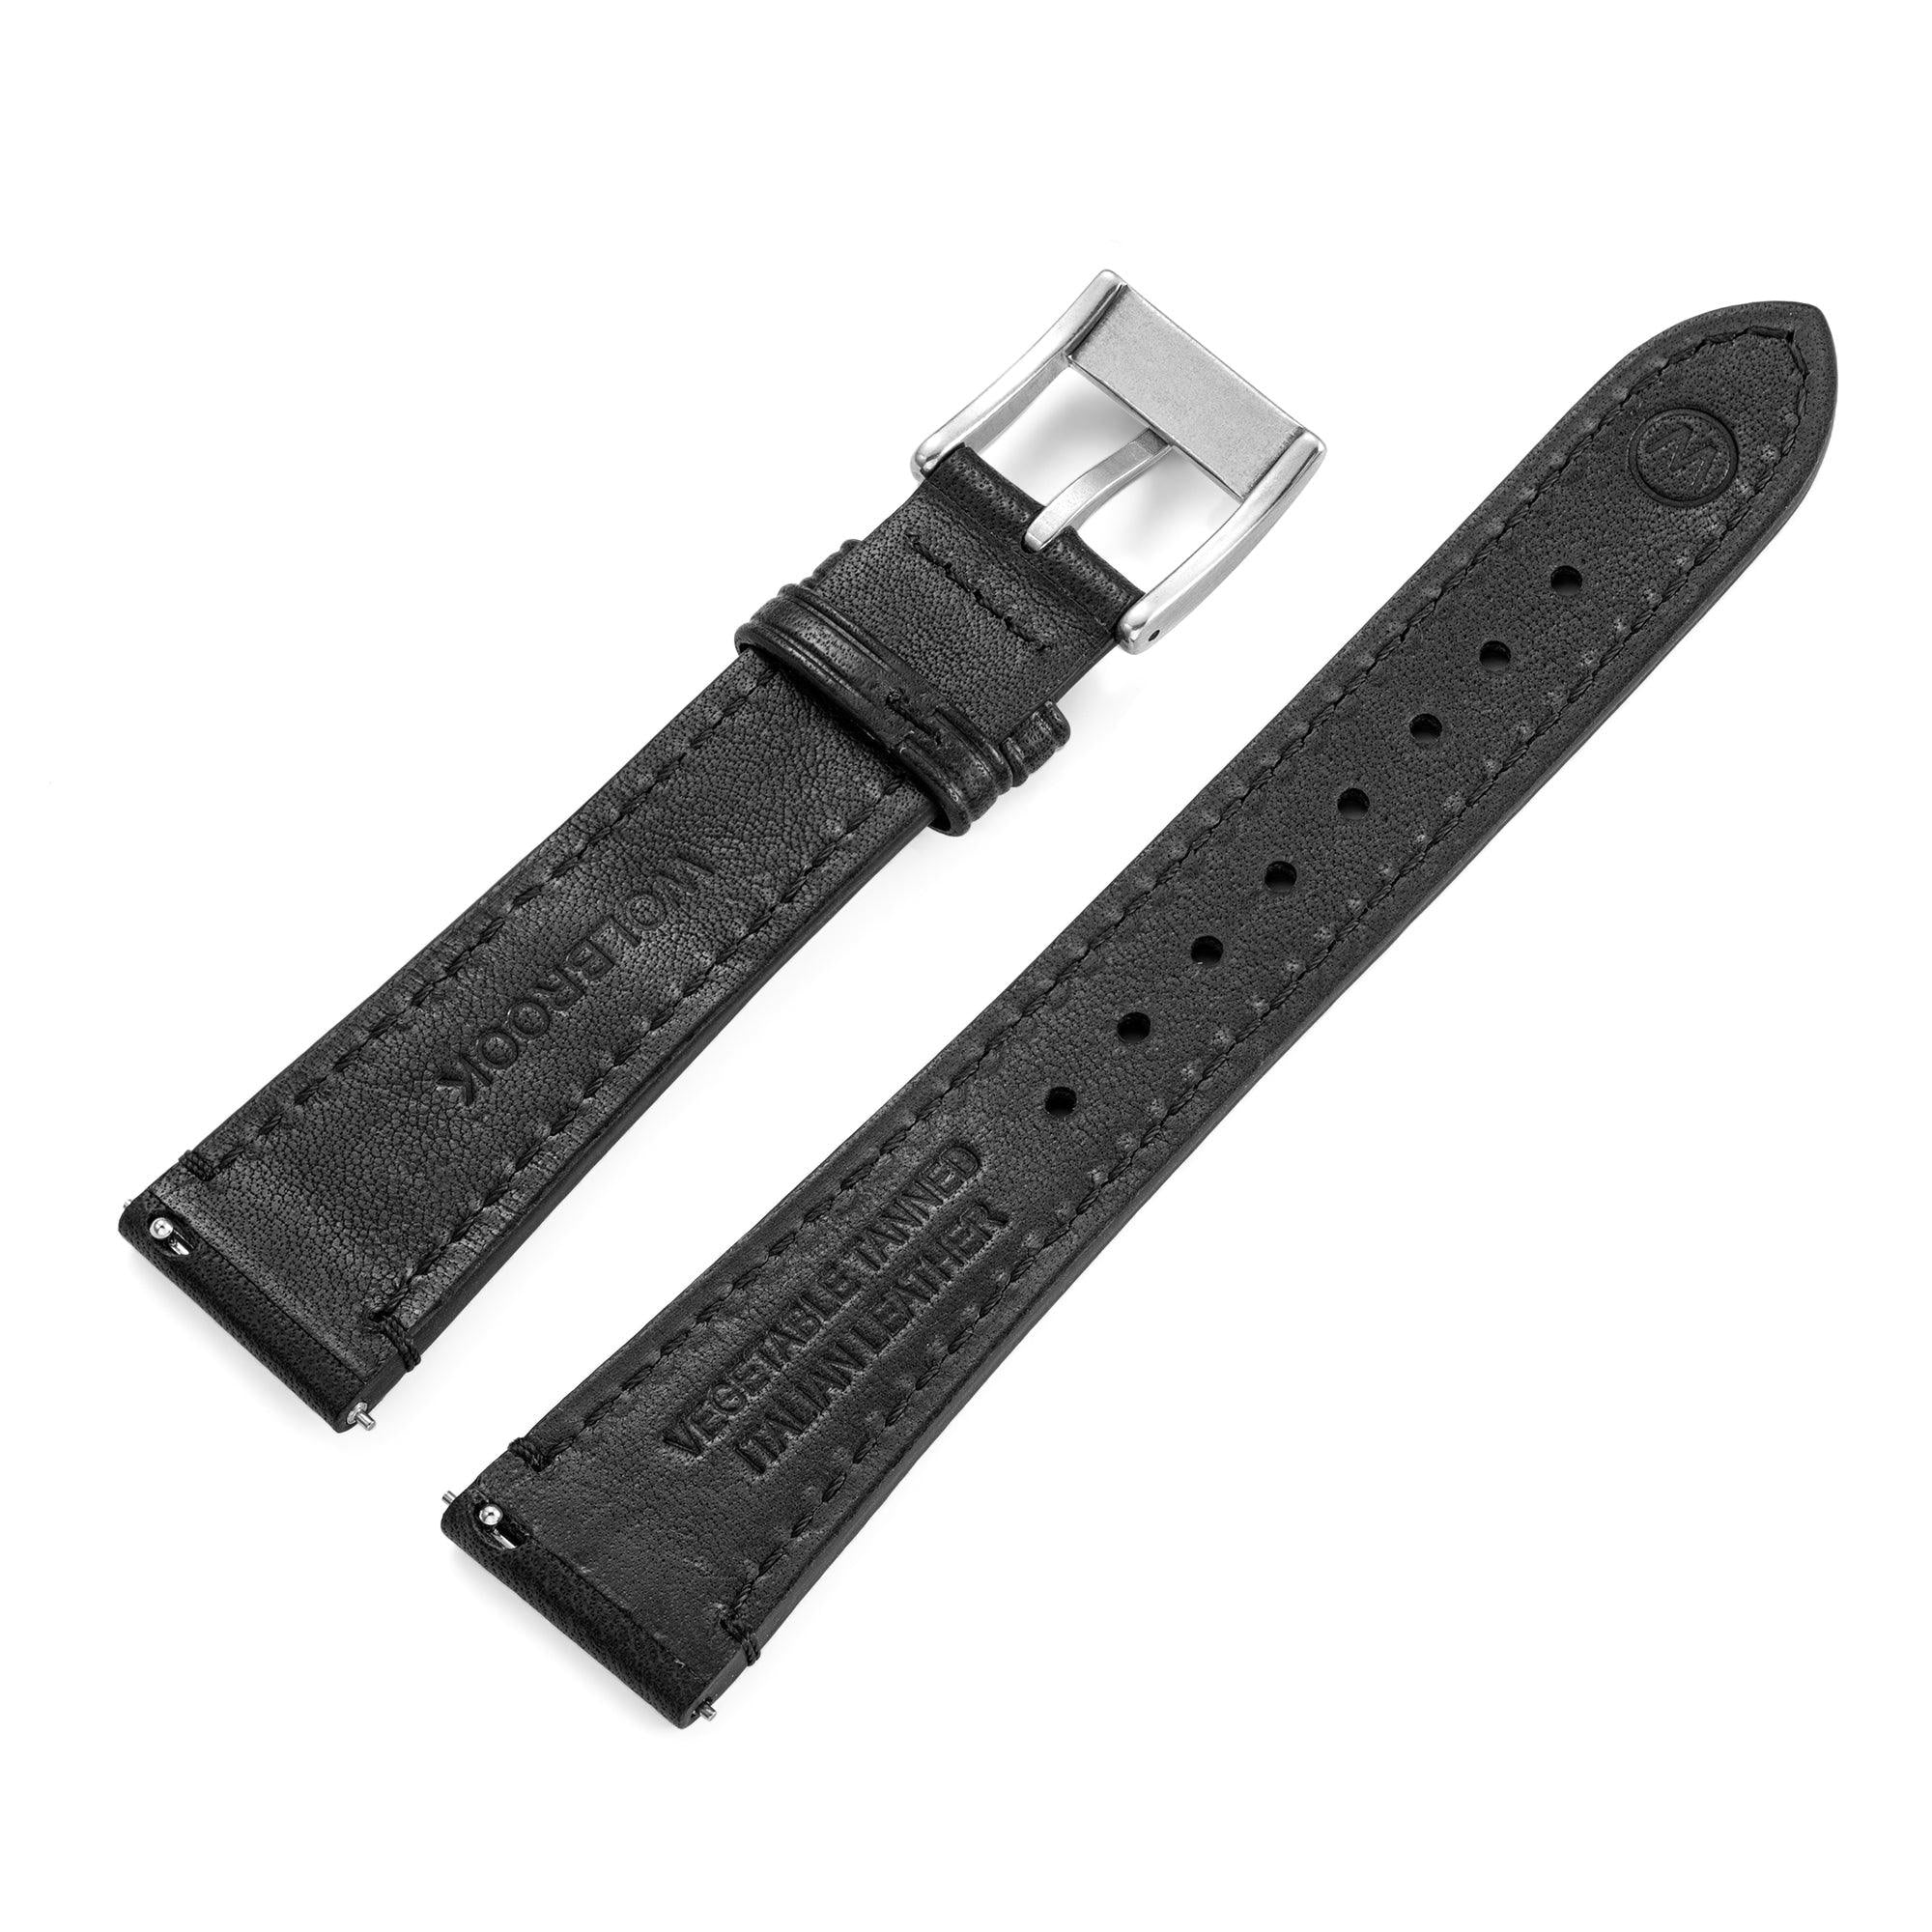 Two-Piece Black Leather Strap & Steel Buckle